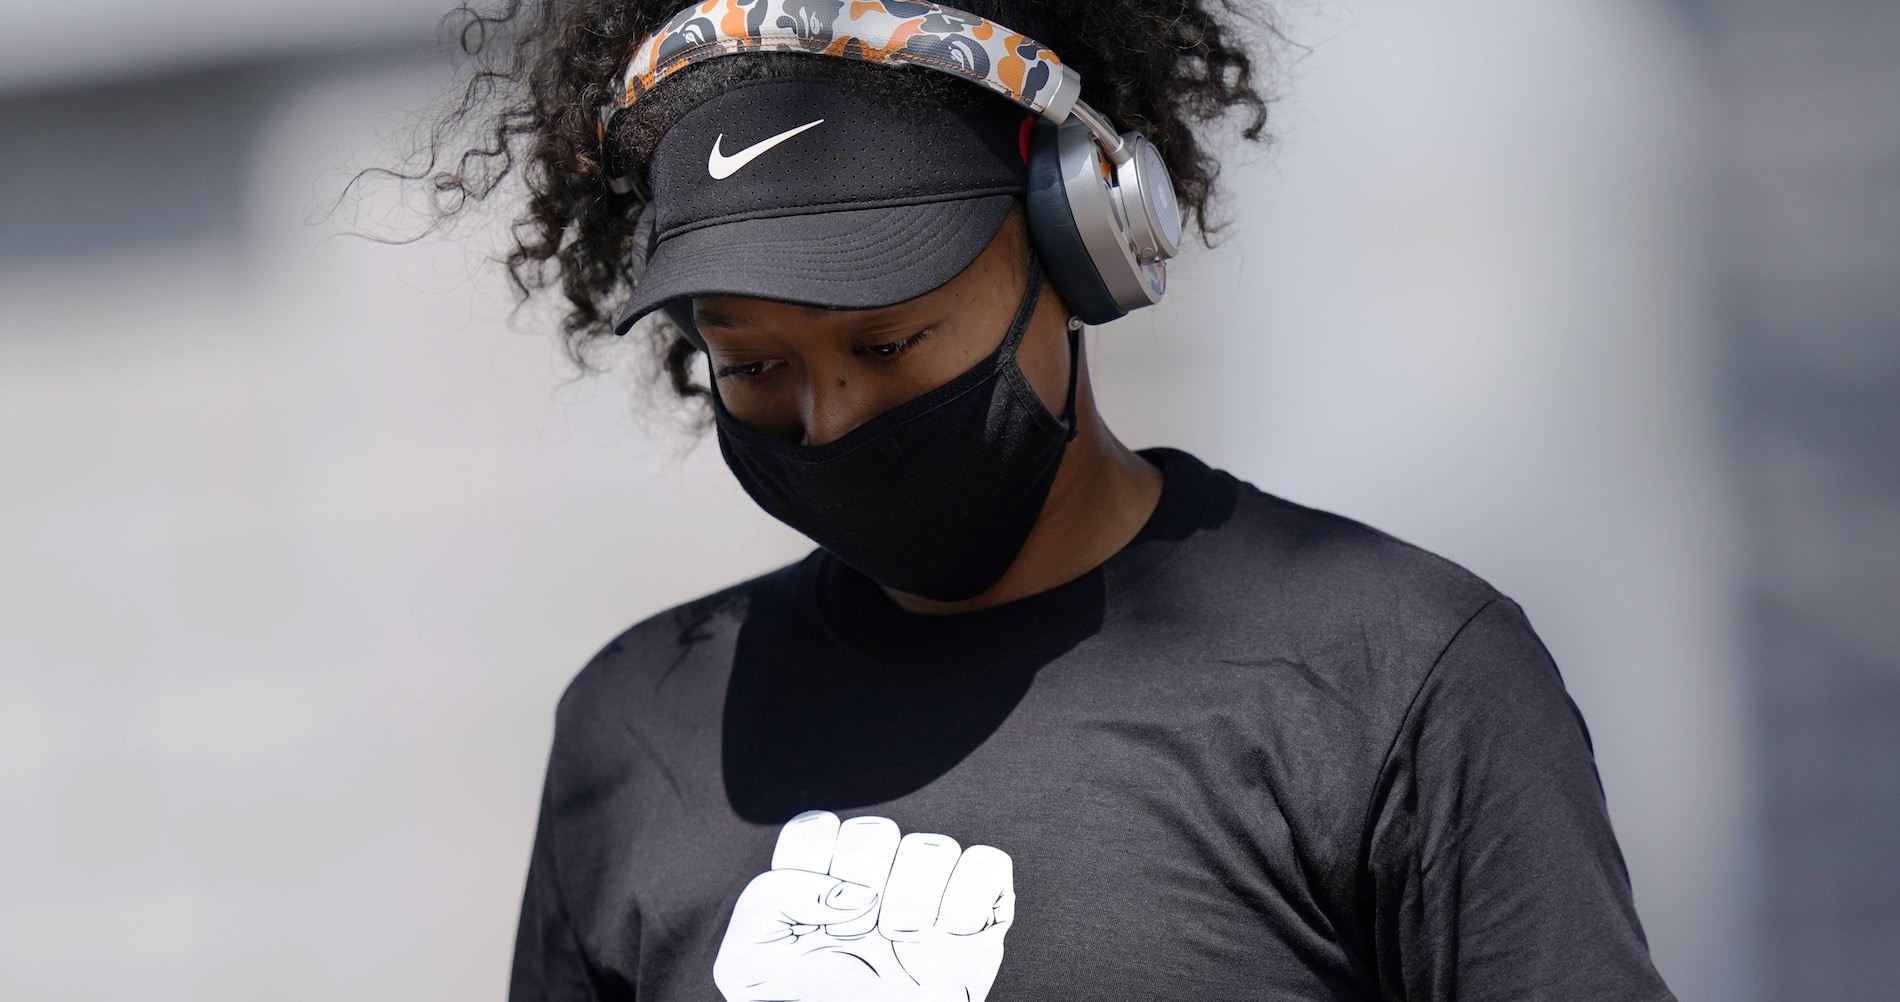 Naomi Osaka during the Western and Southern Open 2020, with a Black Lives Matter shirt